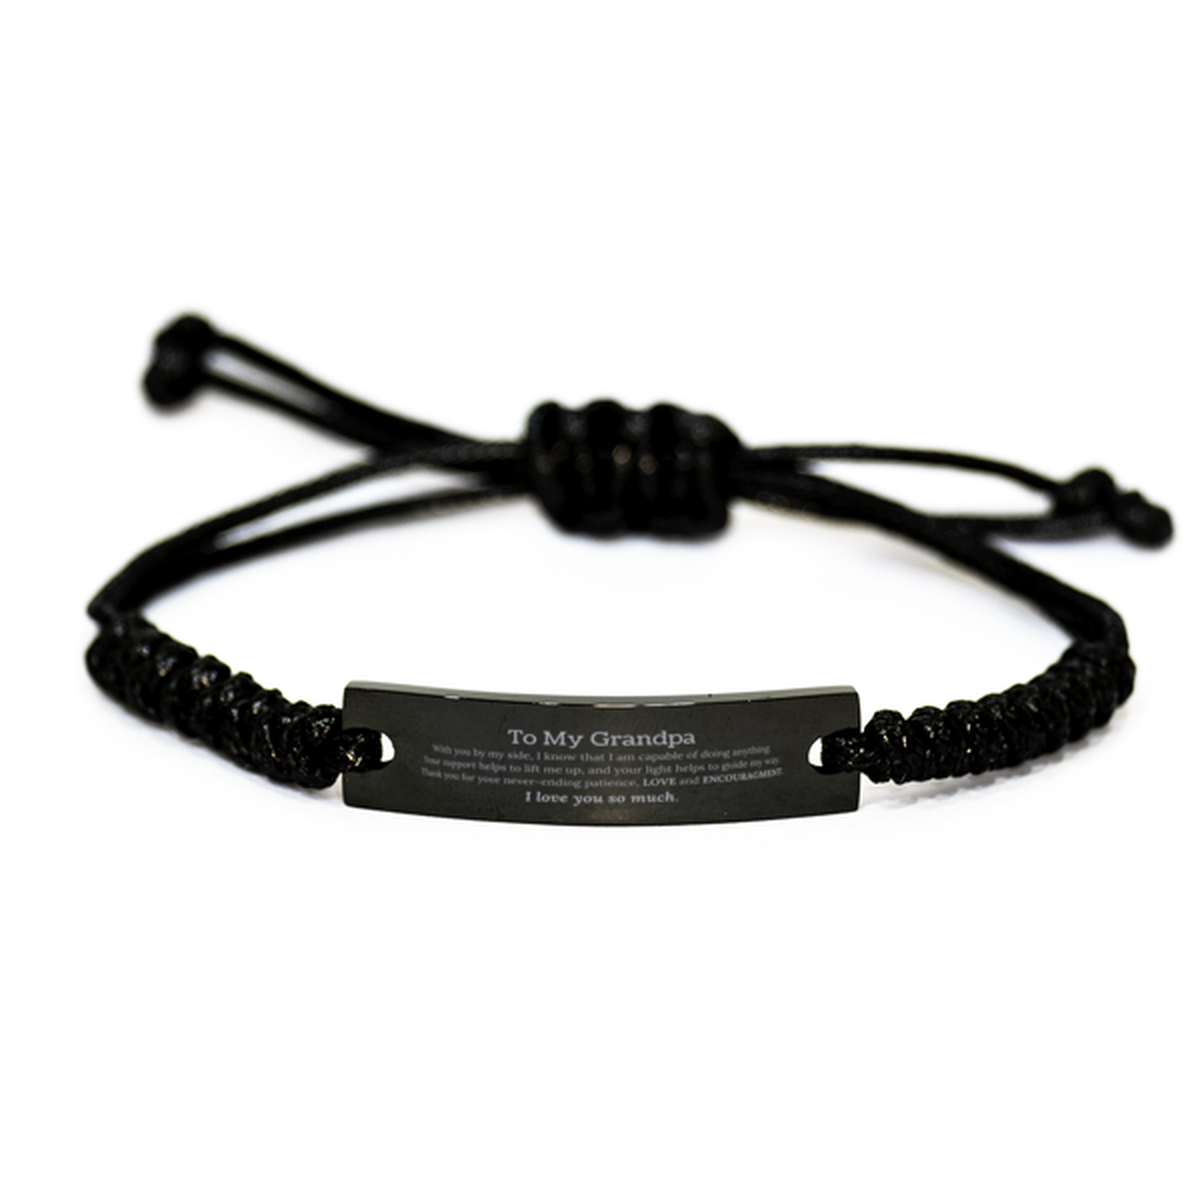 Appreciation Grandpa Black Rope Bracelet Gifts, To My Grandpa Birthday Christmas Wedding Keepsake Gifts for Grandpa With you by my side, I know that I am capable of doing anything. I love you so much